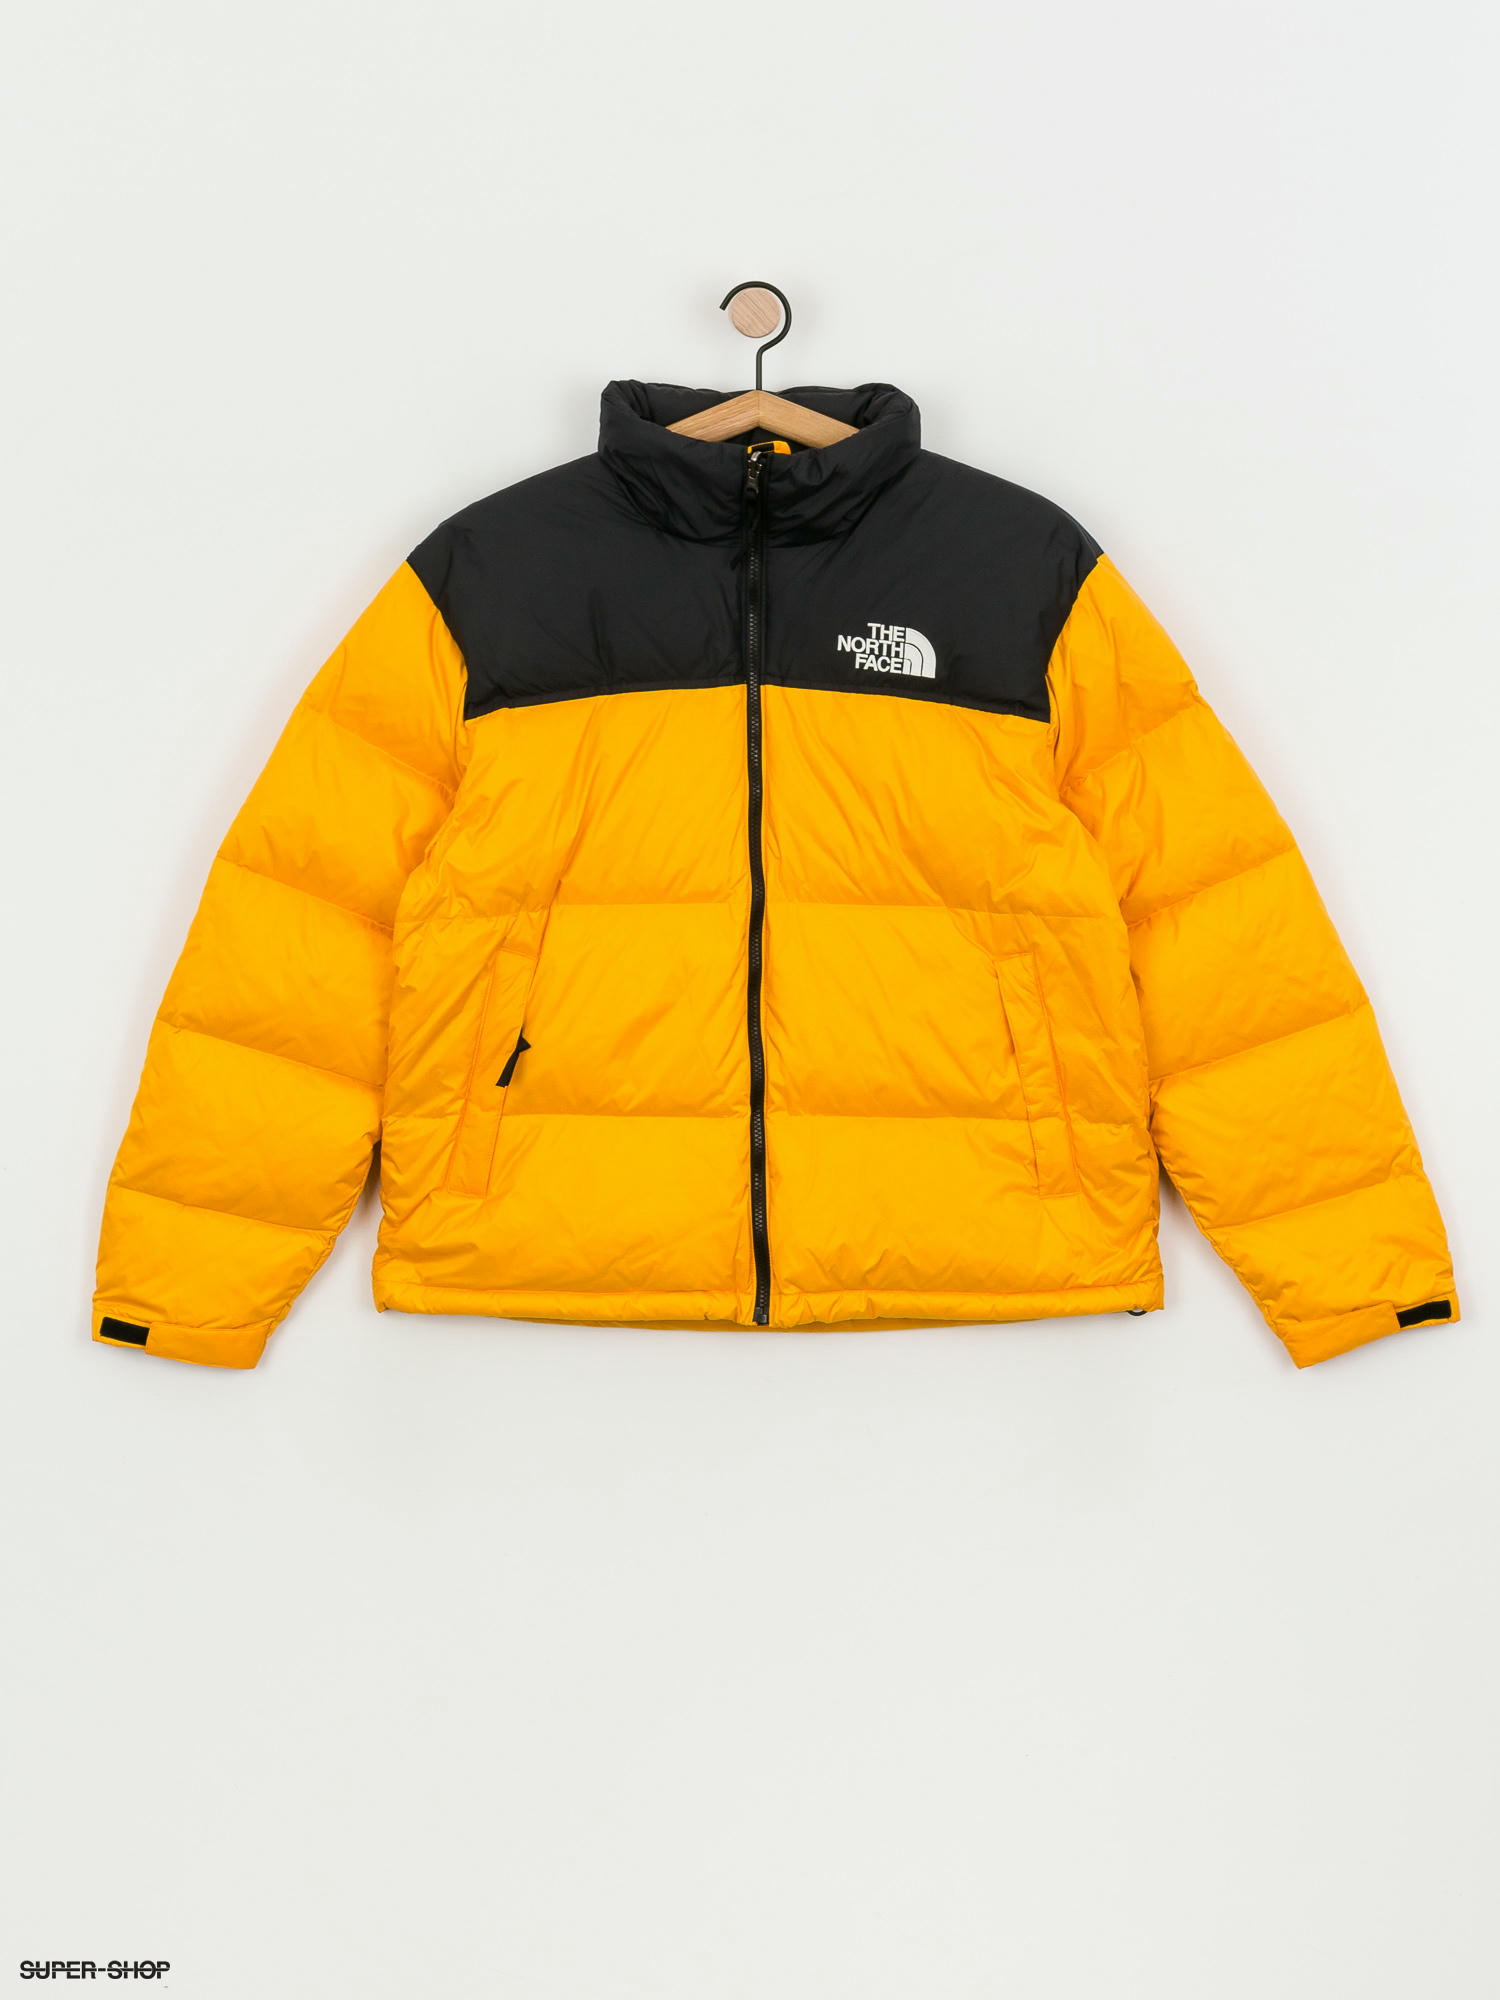 north face 1996 yellow